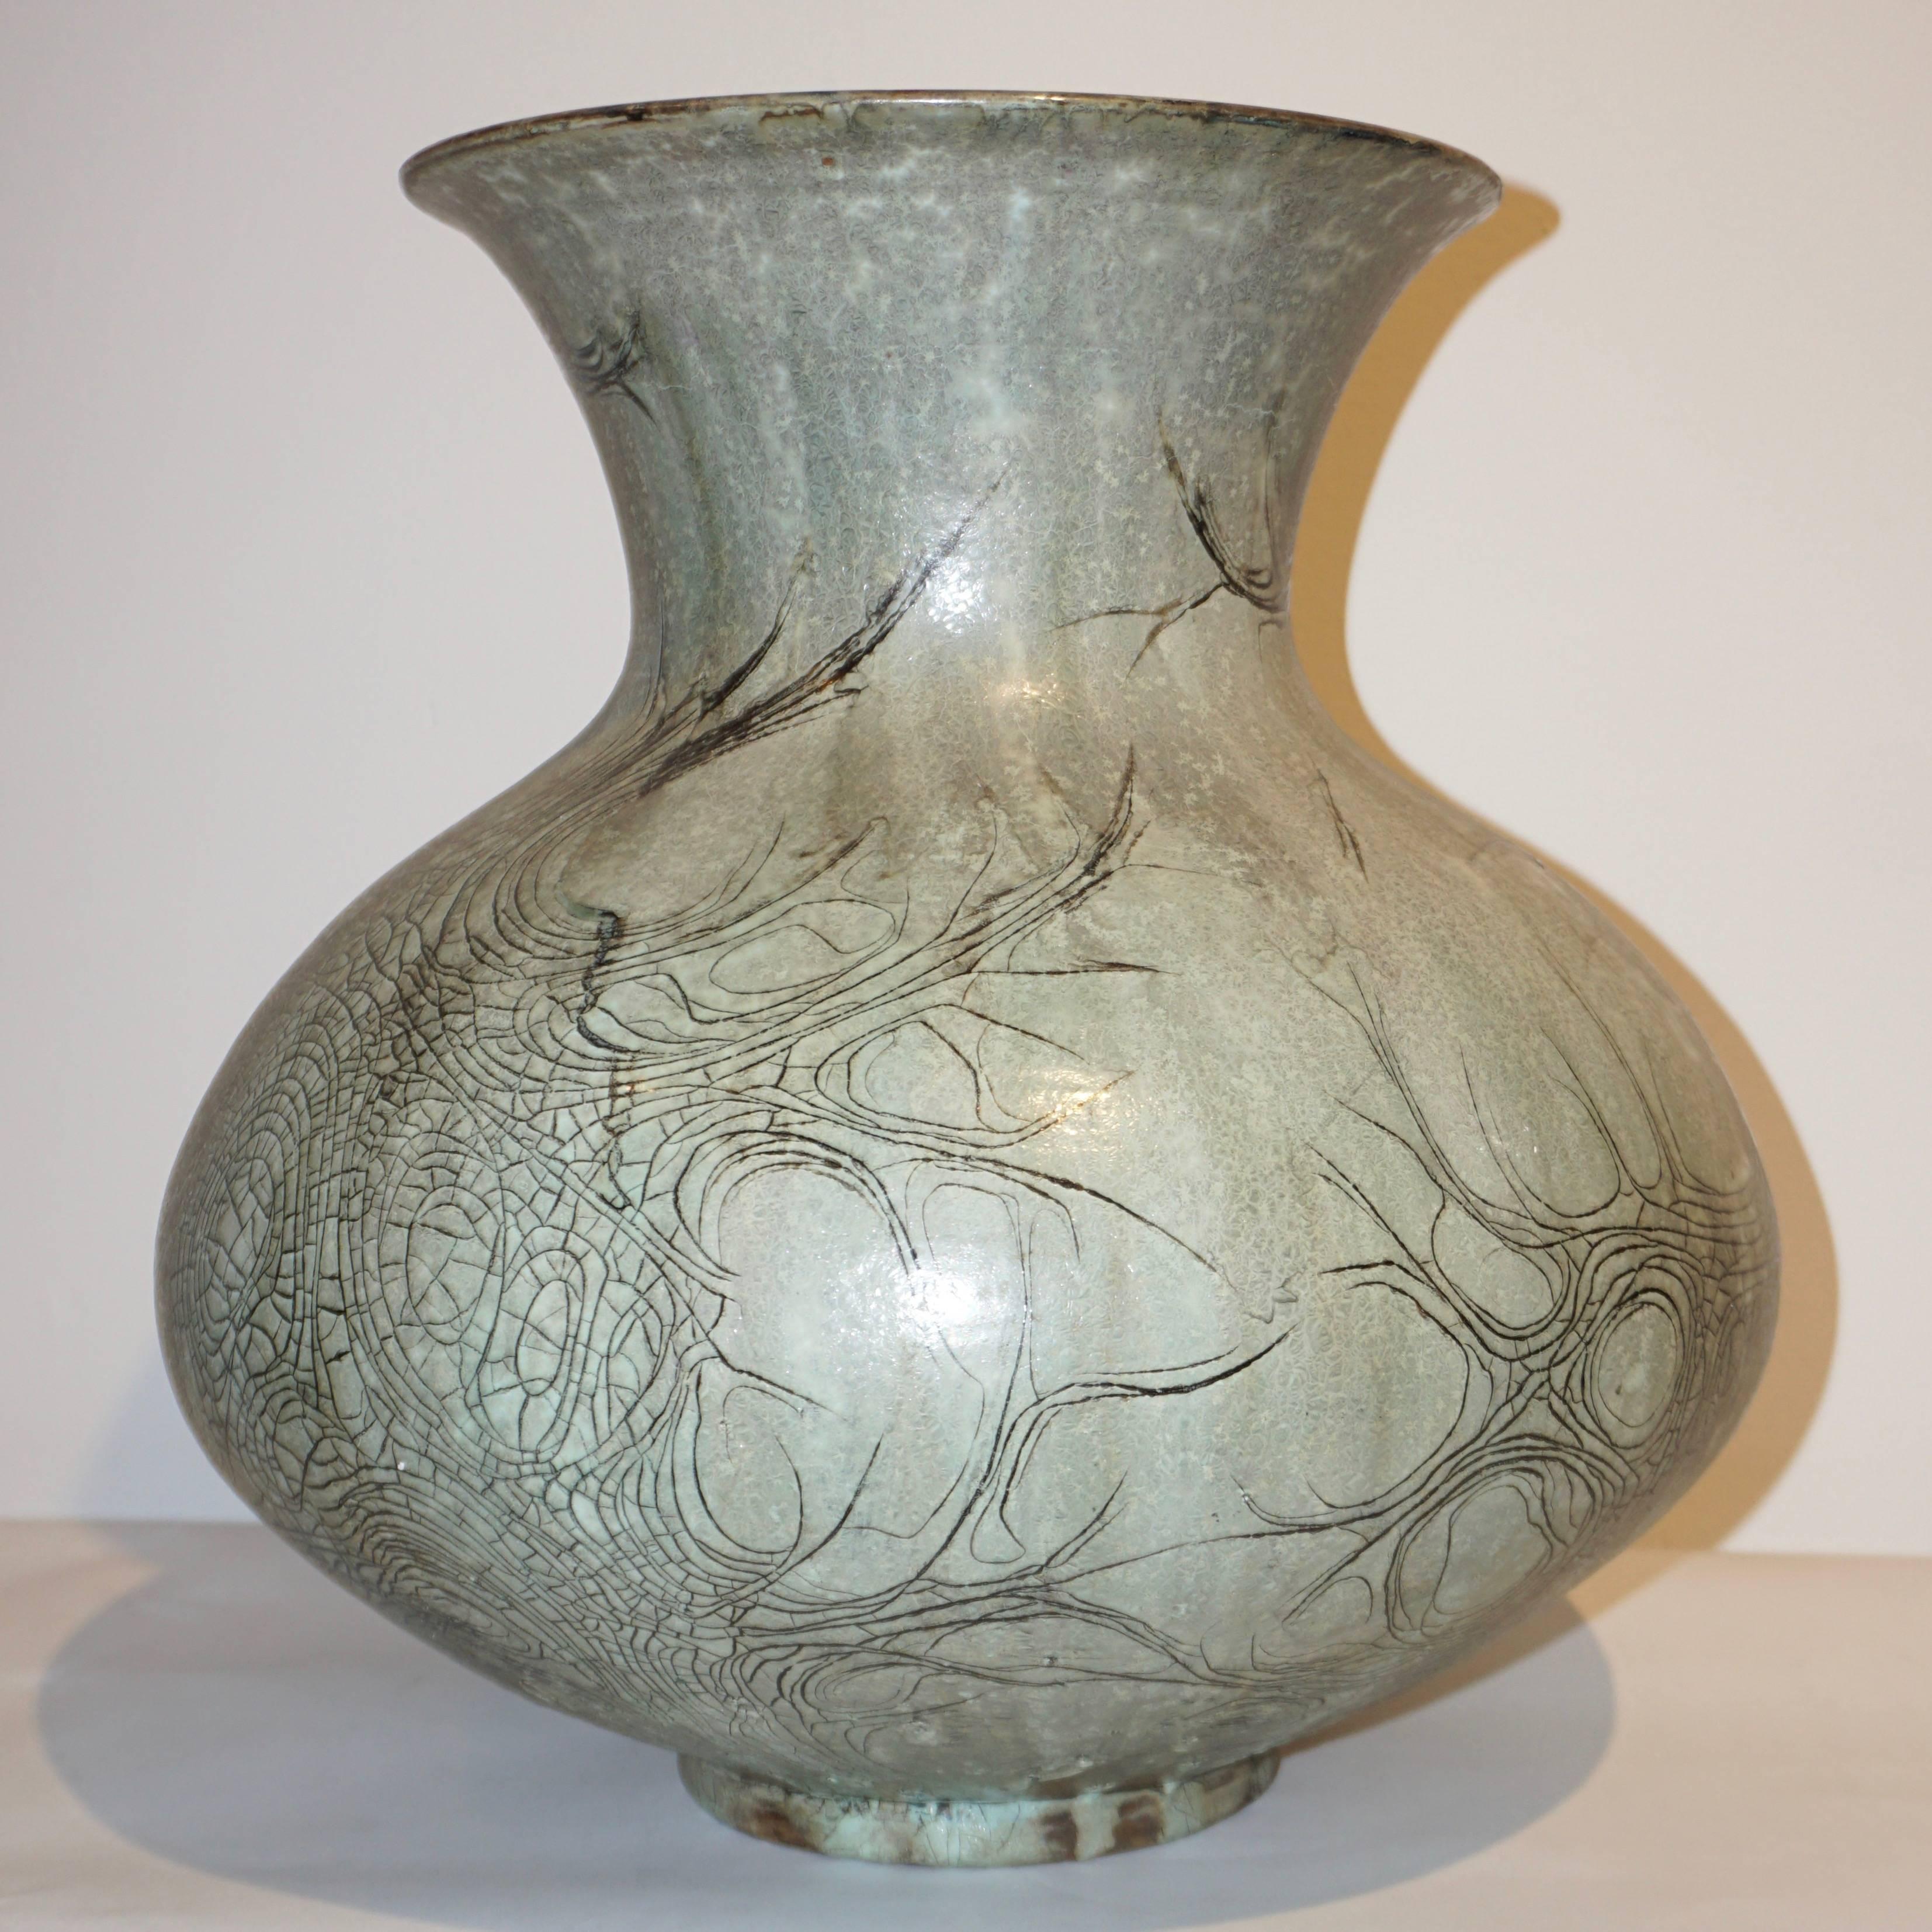 A large Mid-Century Modern organic ceramic vase, signed, created in La Borne (La Loire Valley) France, in grès stoneware skilfully enameled in a pebble gray tint and decorated with a hand carved drawing resembling ancient graffiti. The perfect grey